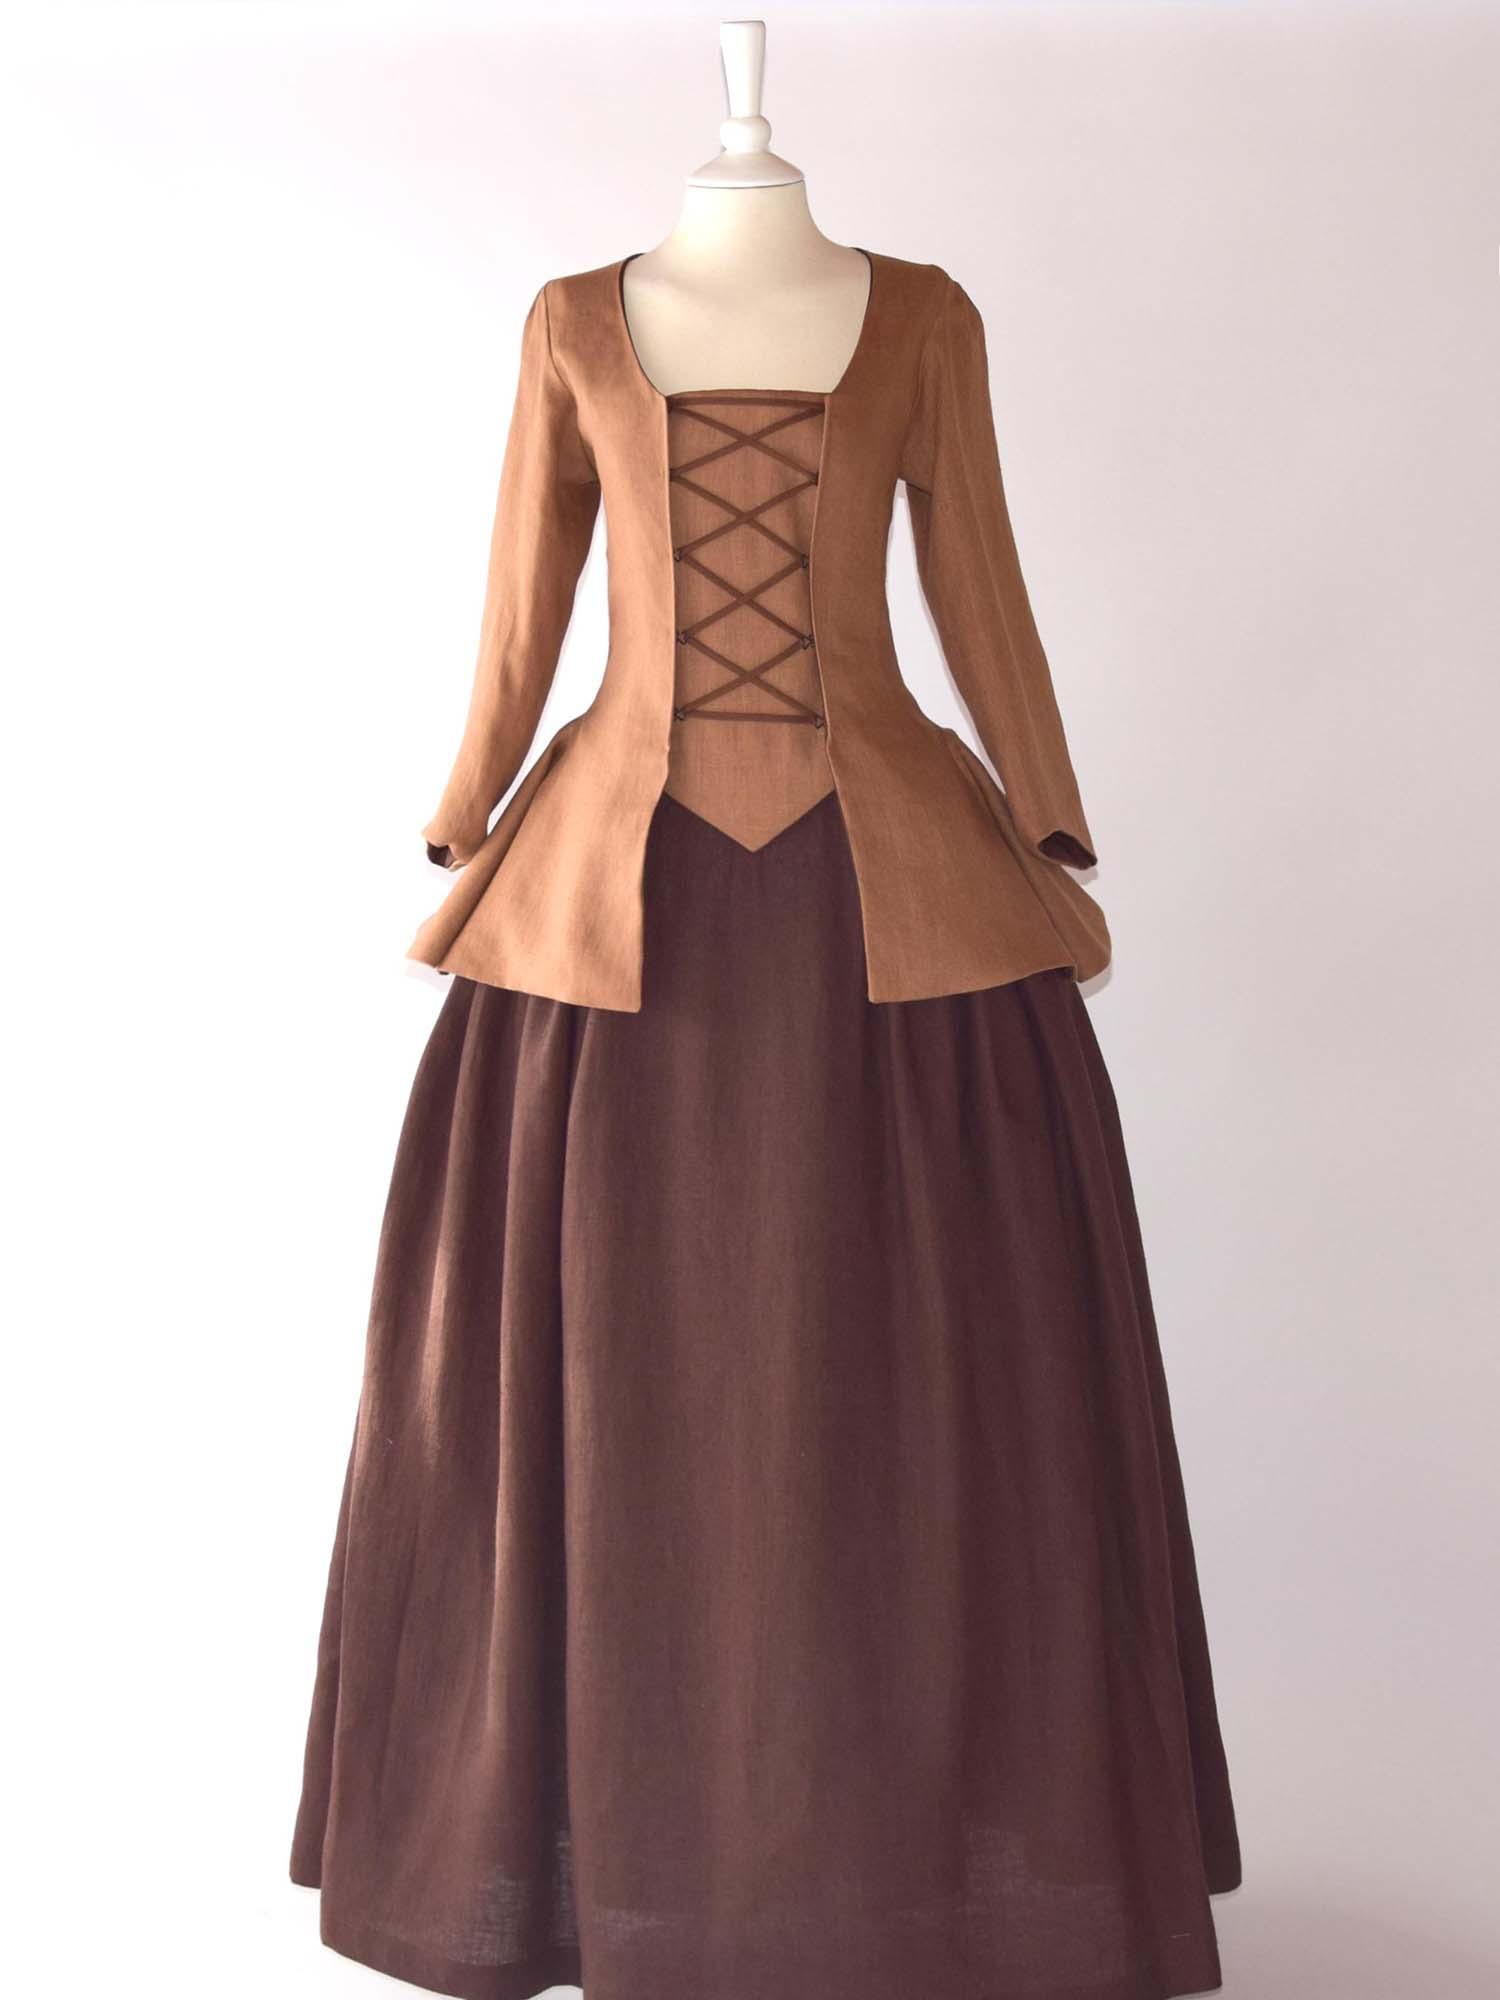 JANET, Colonial Costume in Toffee & Chocolate Linen - Atelier Serraspina